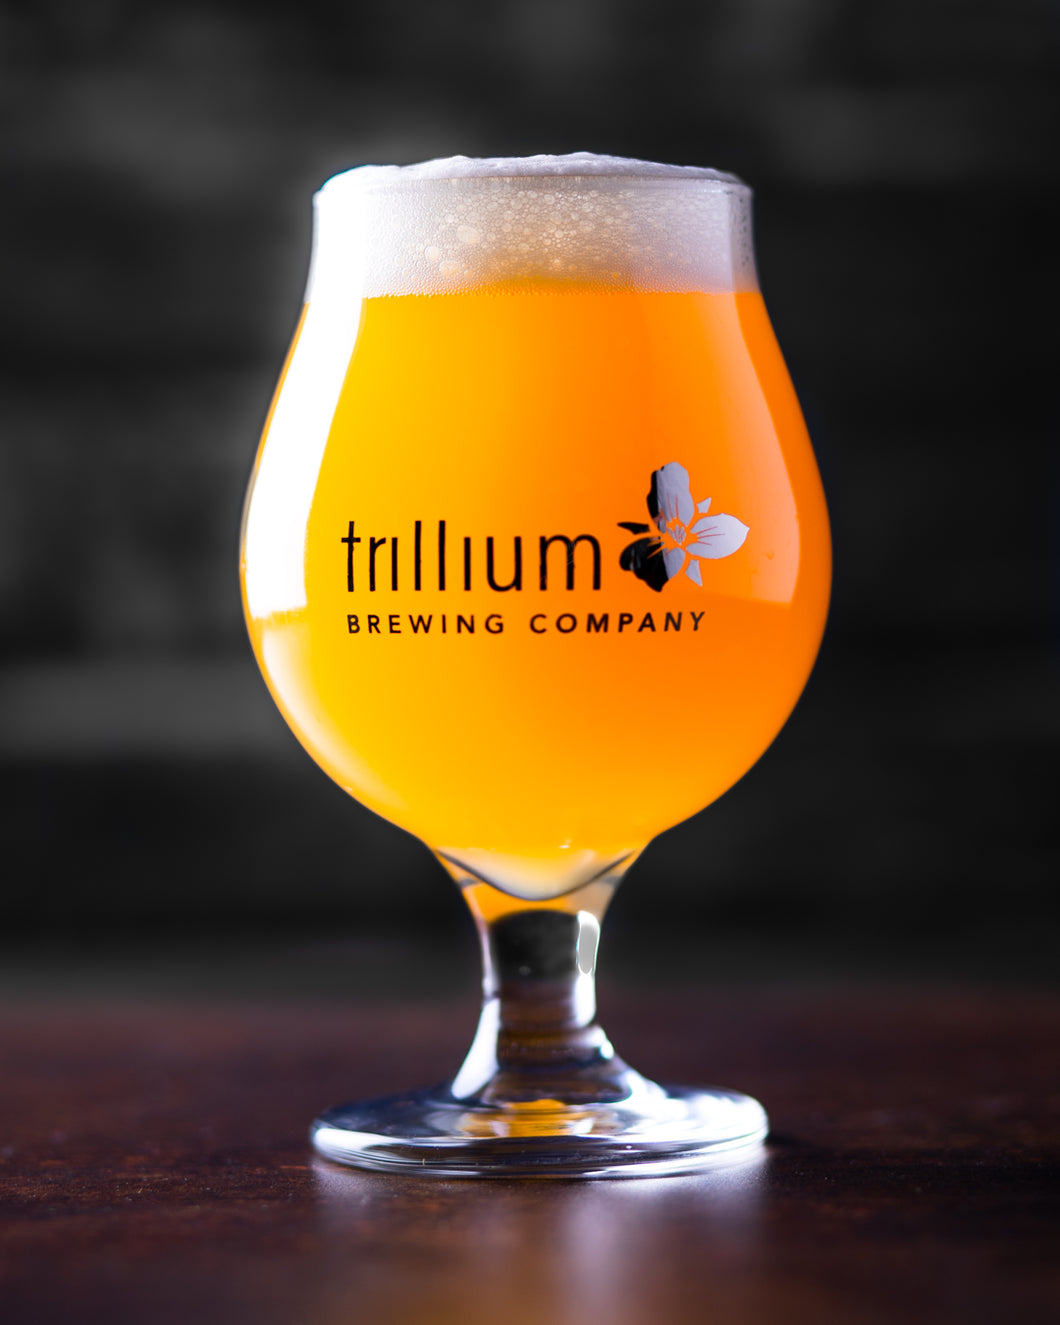 Clear Platinum Tulip glass filled with beer